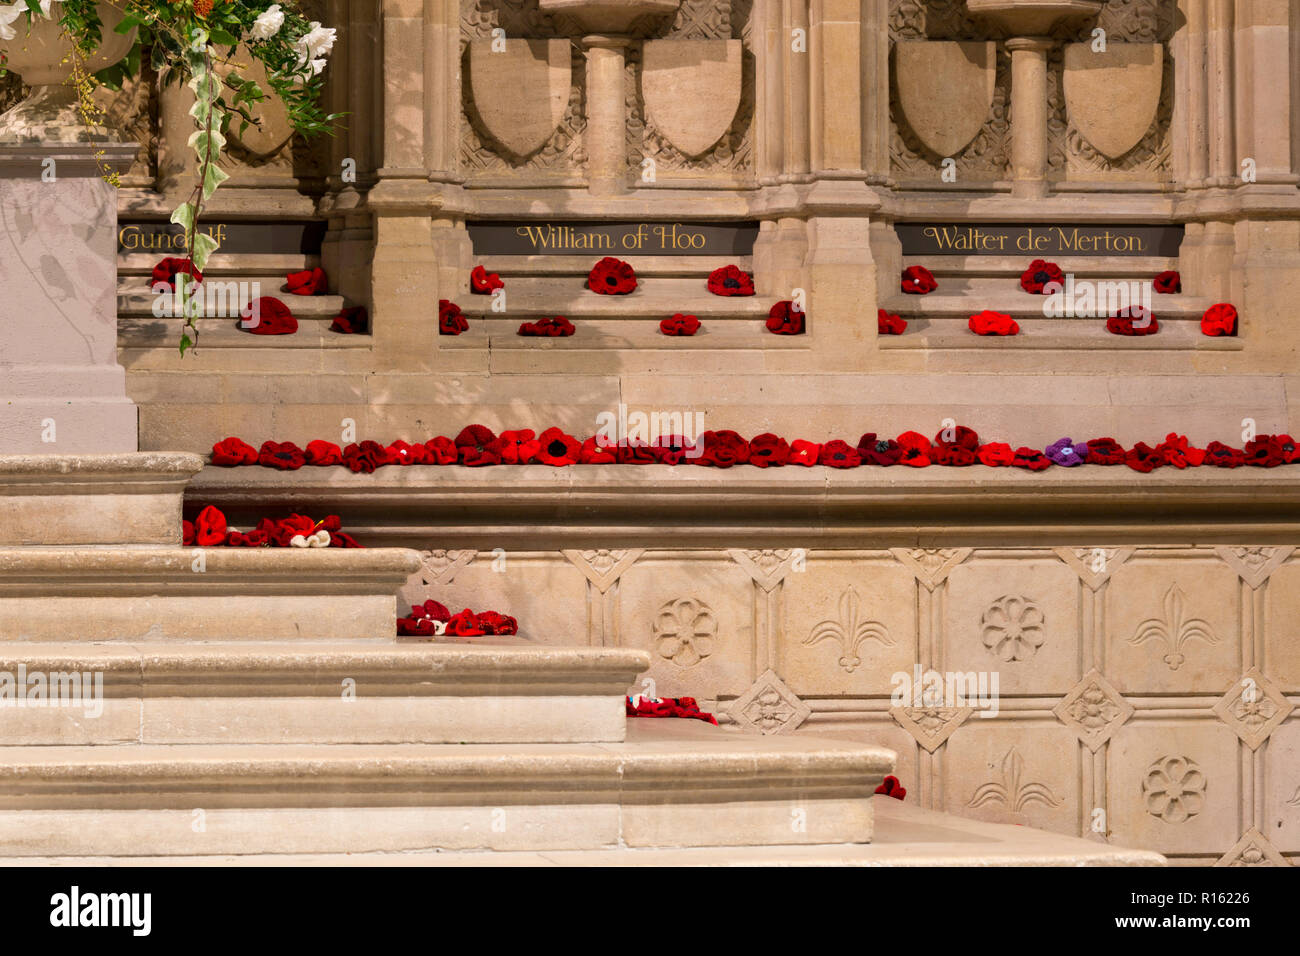 Hand-knitted poppies to commemorate 100 years of the Armistice at Rochester Cathedral, Kent, UK. Stock Photo